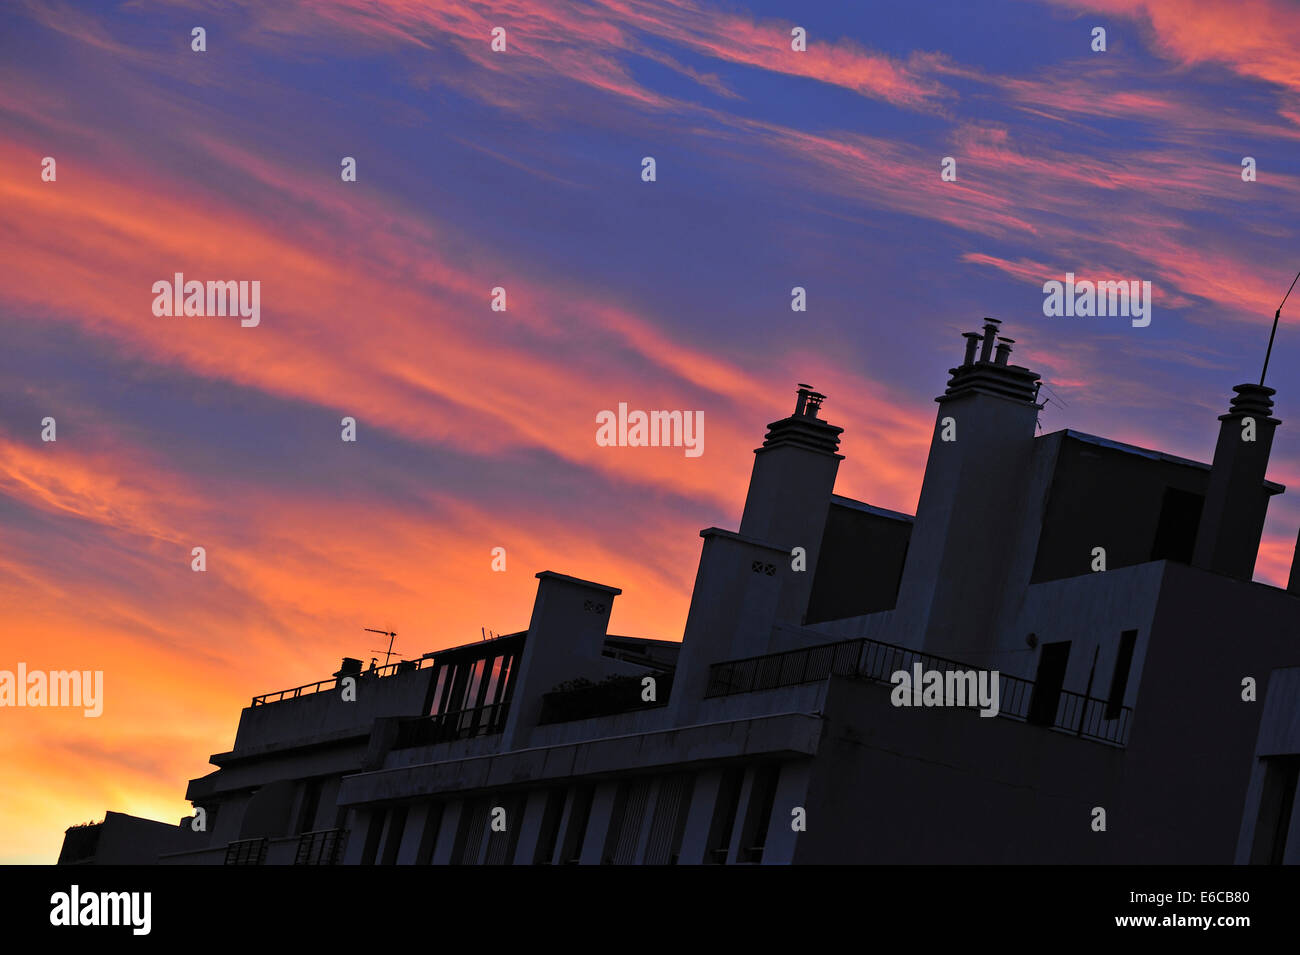 Building silhouette at sunrise / sunset with red sky Stock Photo